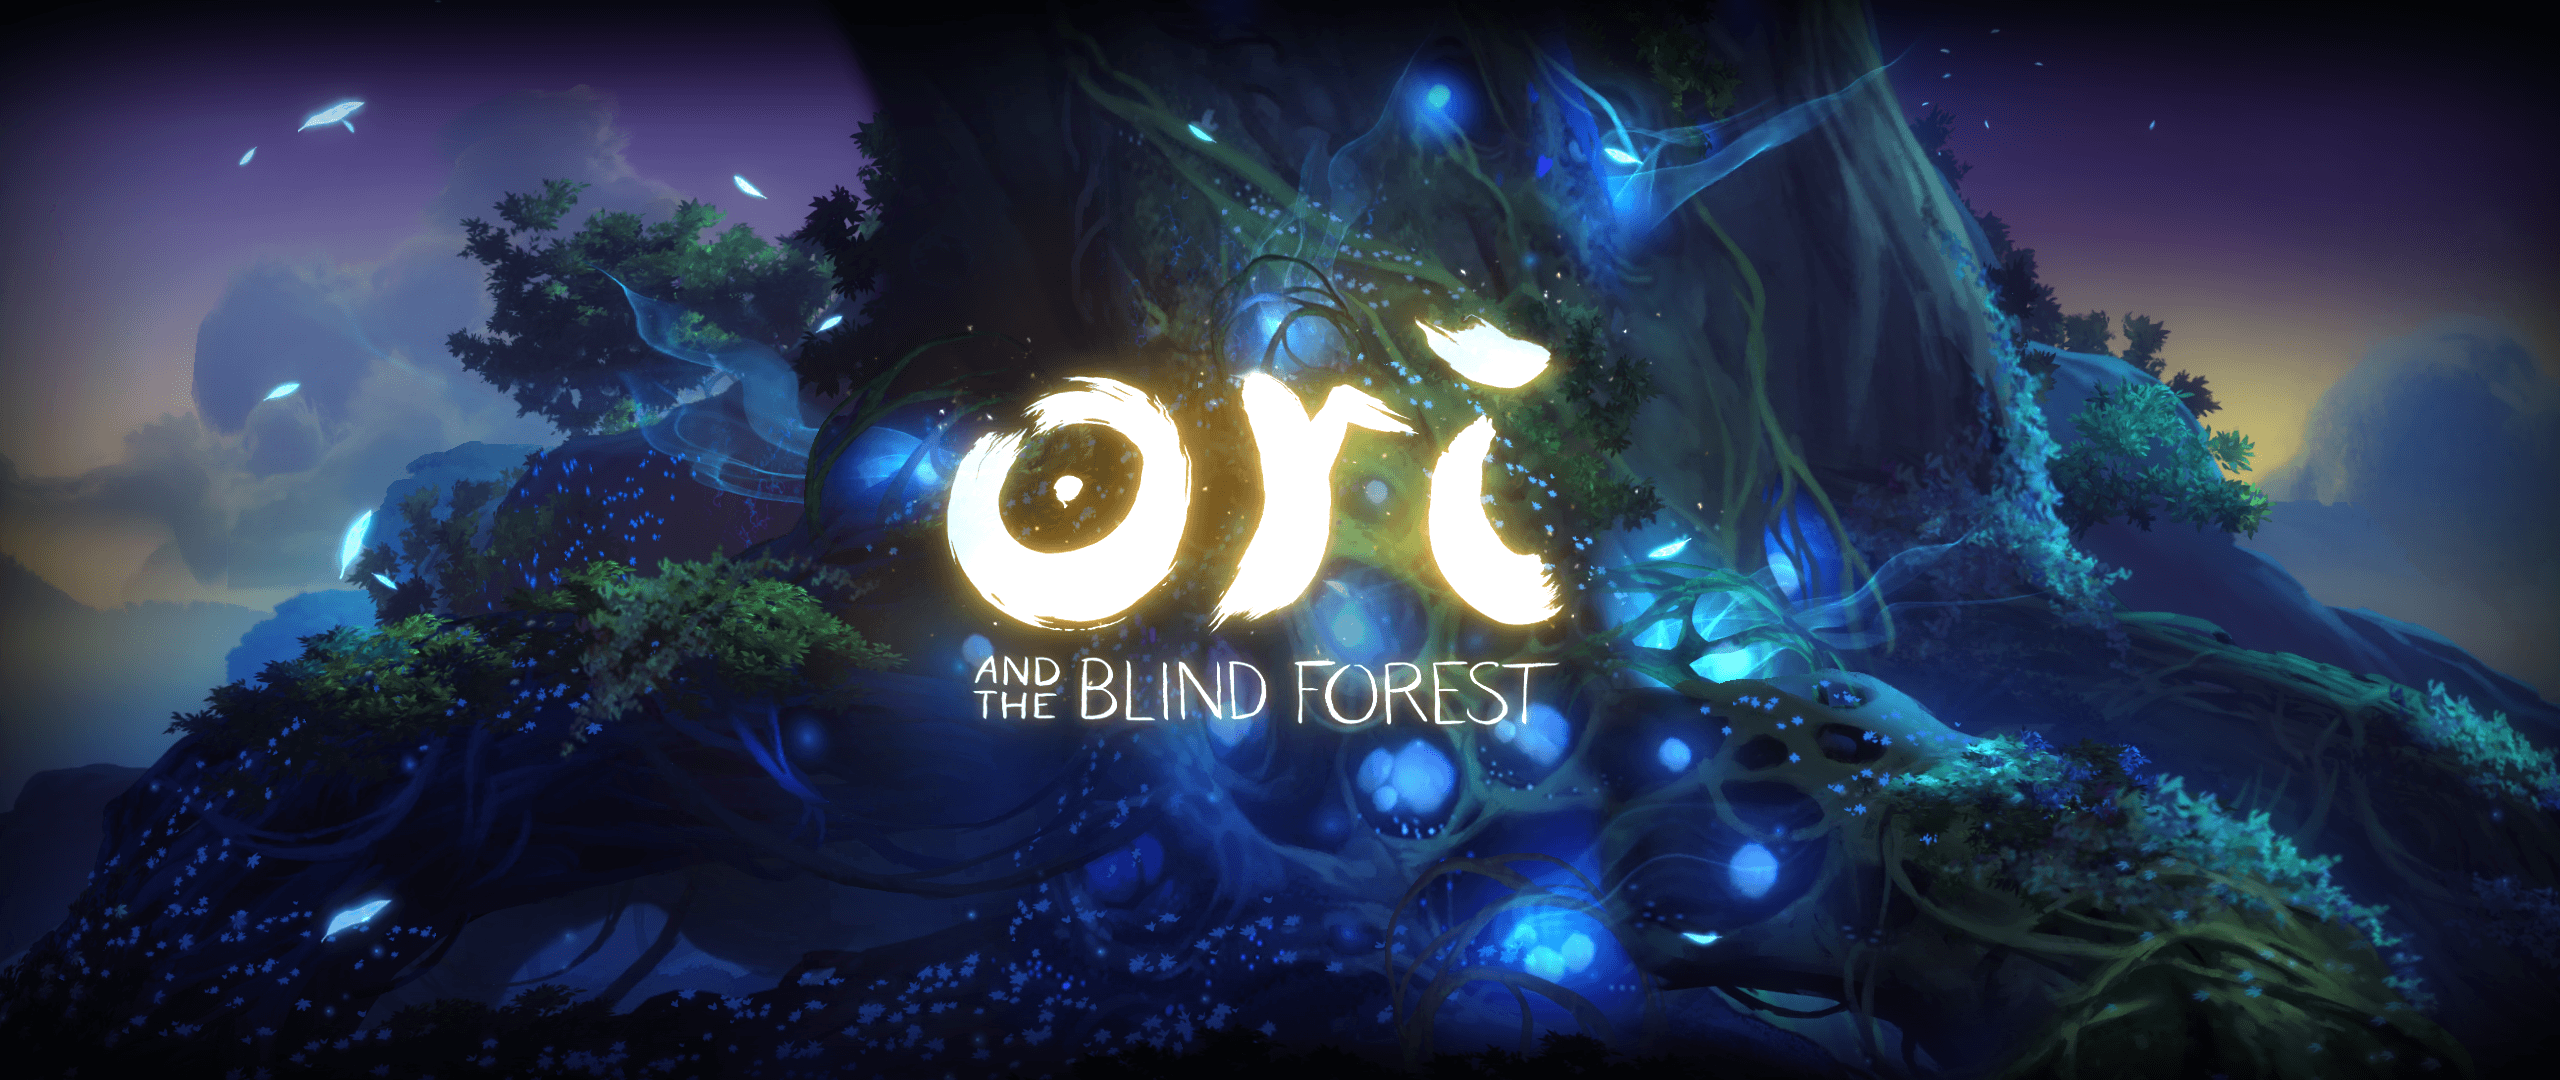 ori and the blind forest iphone wallpaper menu